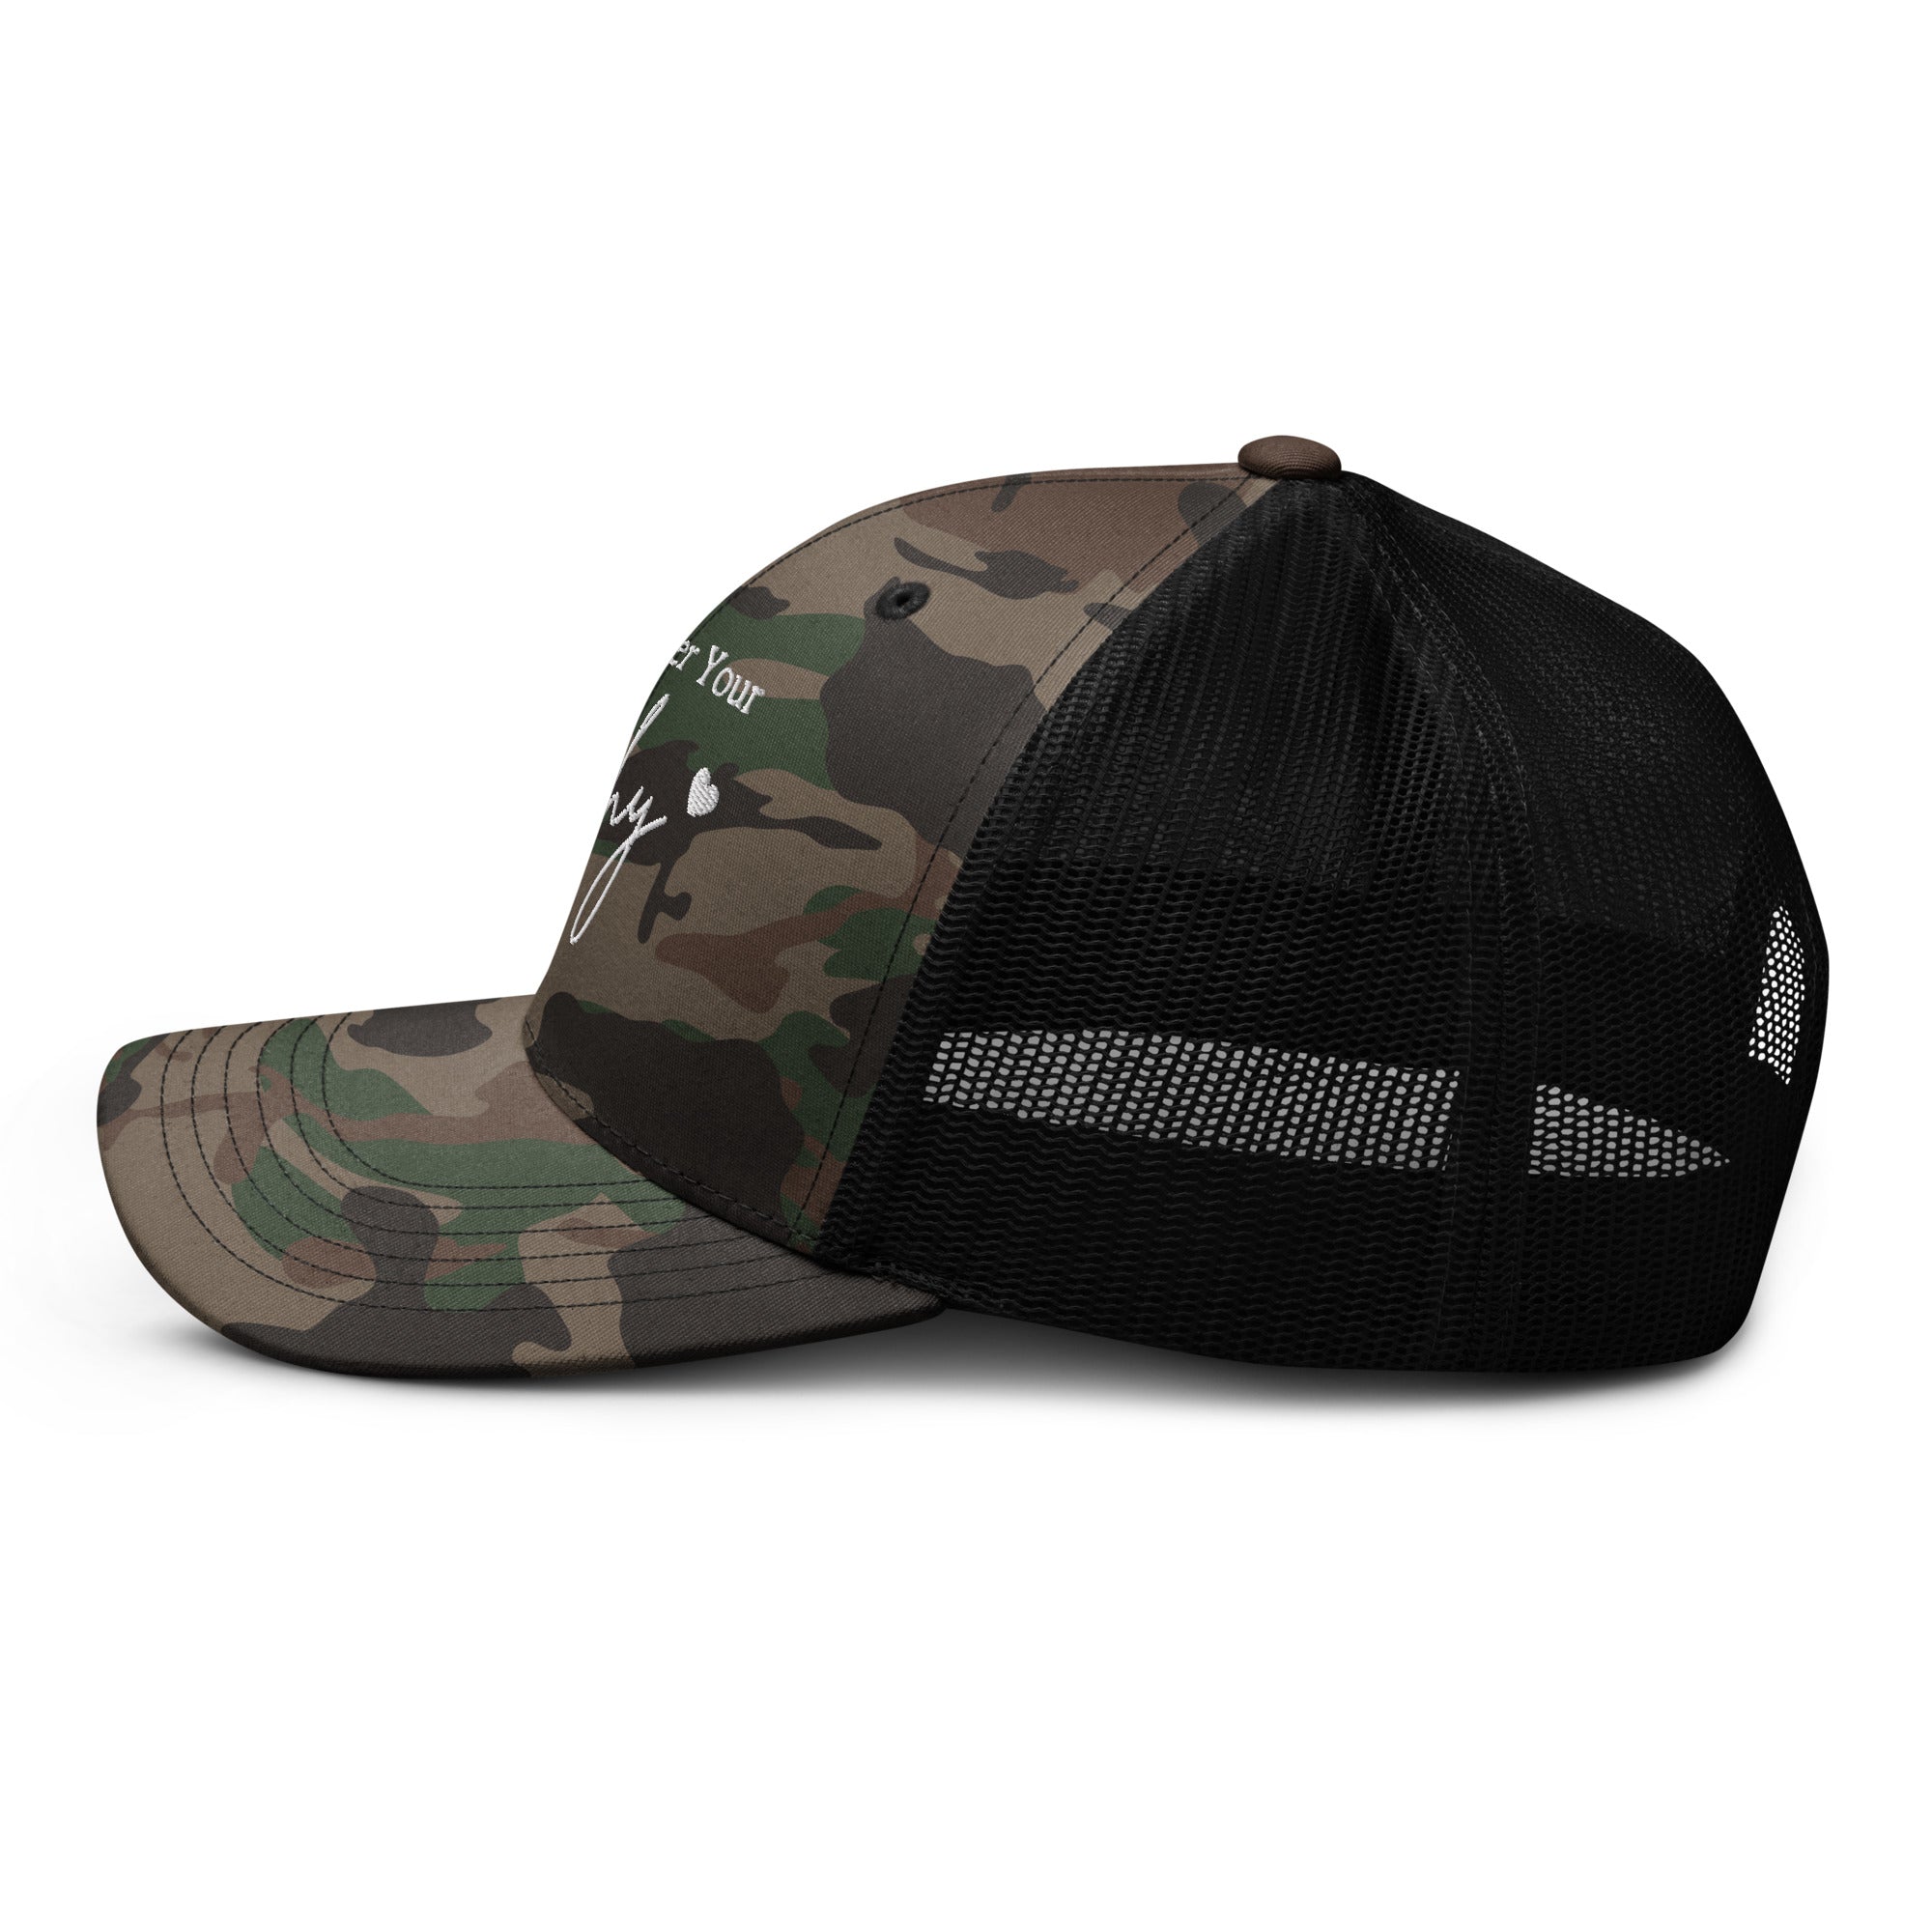 Remember - Camouflage Trucker Hat